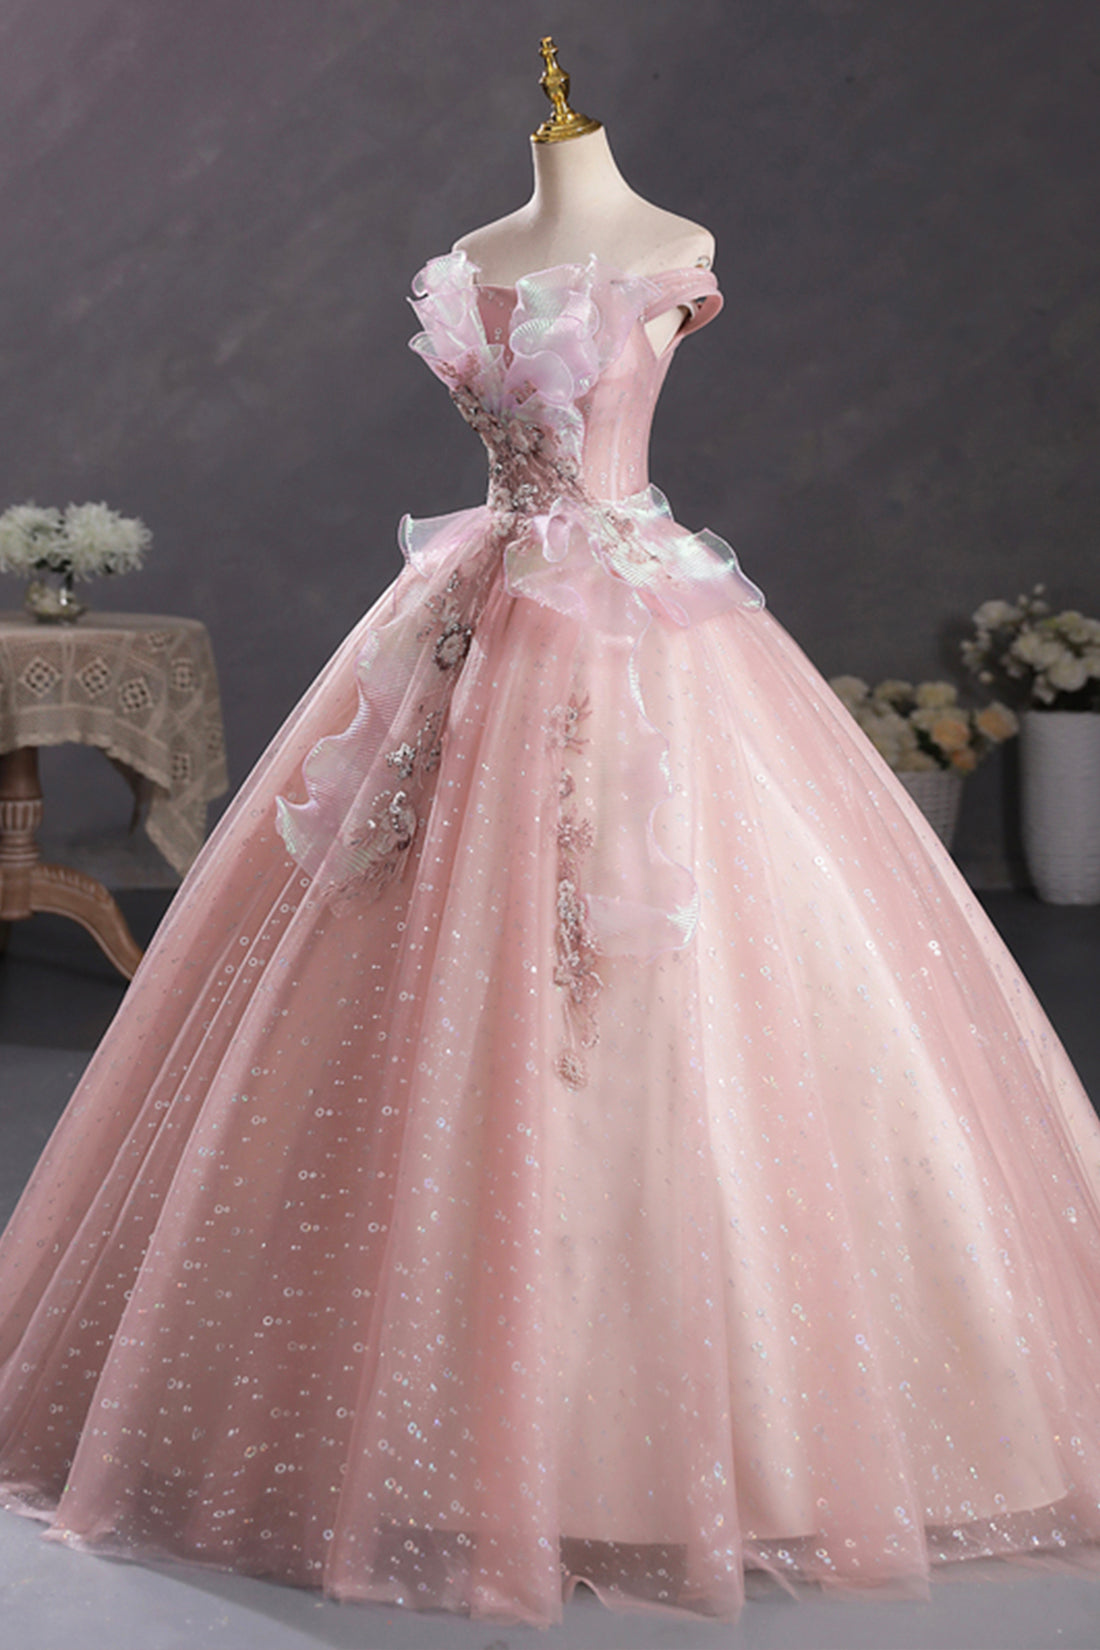 Pink Tulle Long A-Line Prom Dress with Lace, Beautiful Off Shoulder Sweet 16 Dress